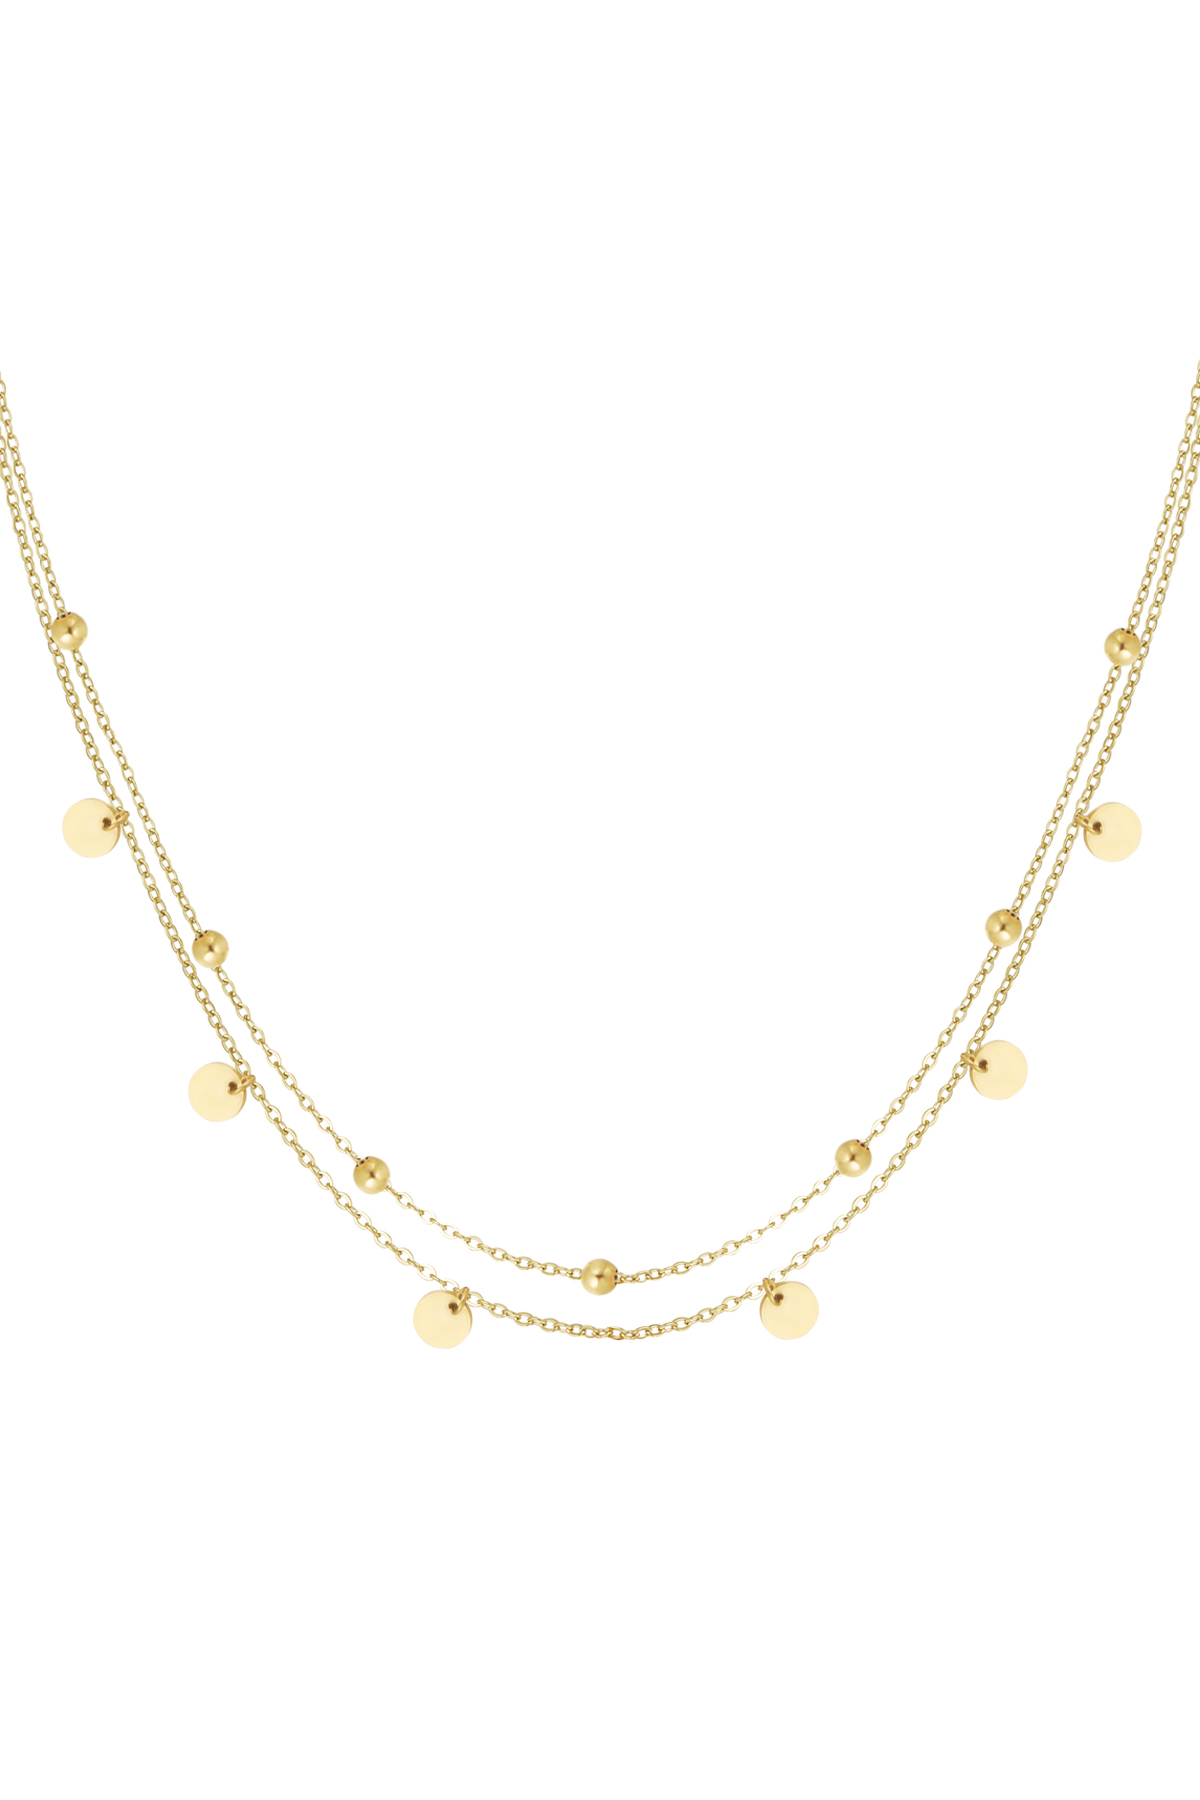 Necklace balls and circles - gold h5 